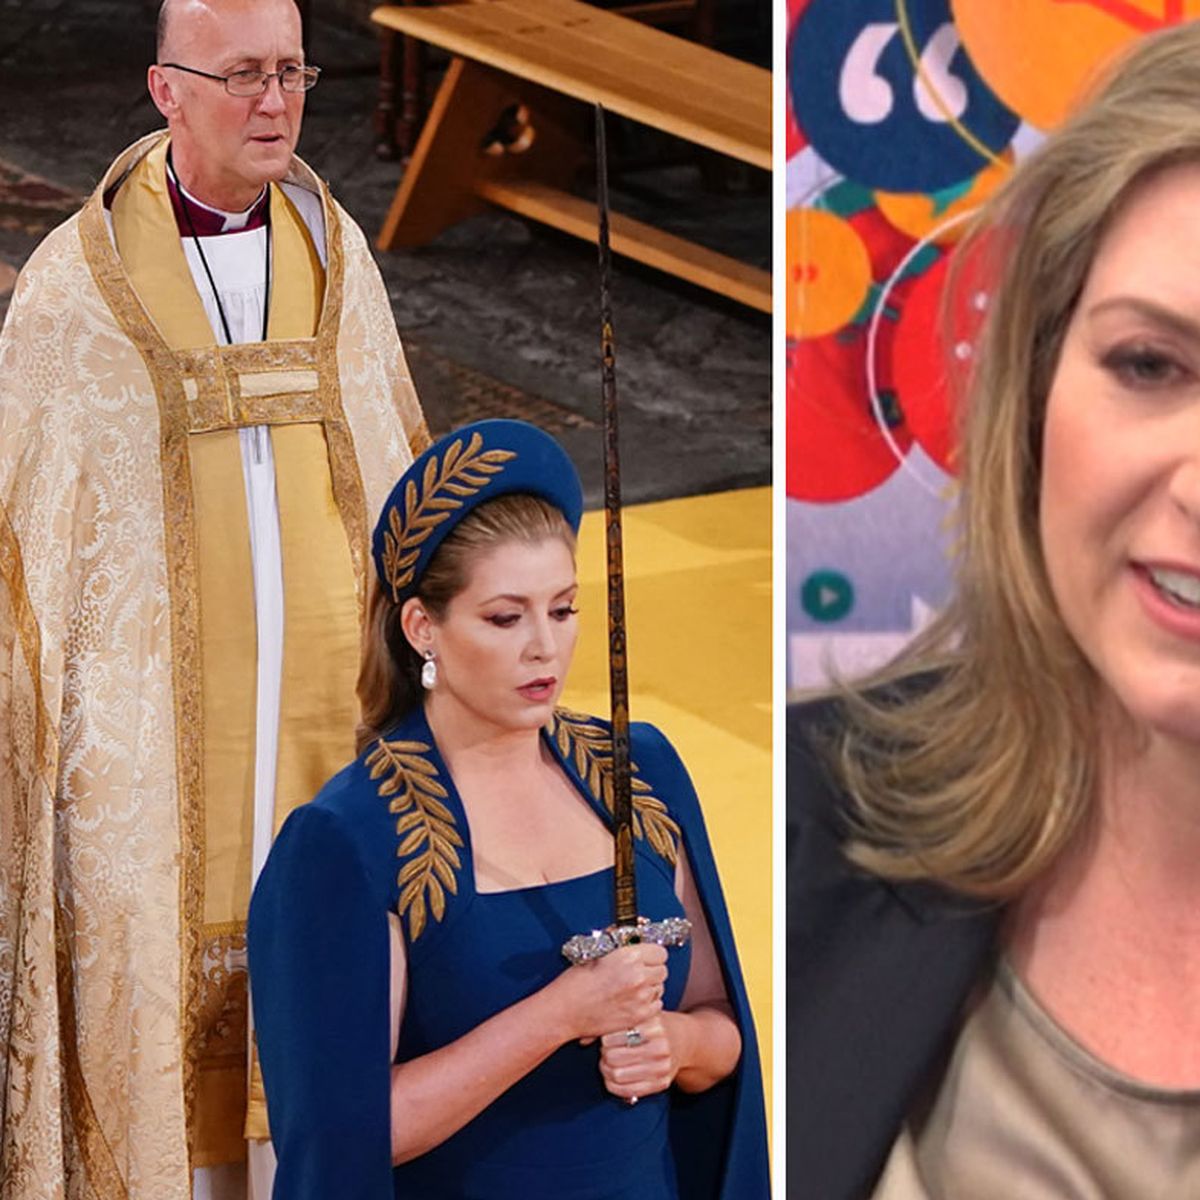 Penny Mordaunt did *major* prep so she could carry that sword